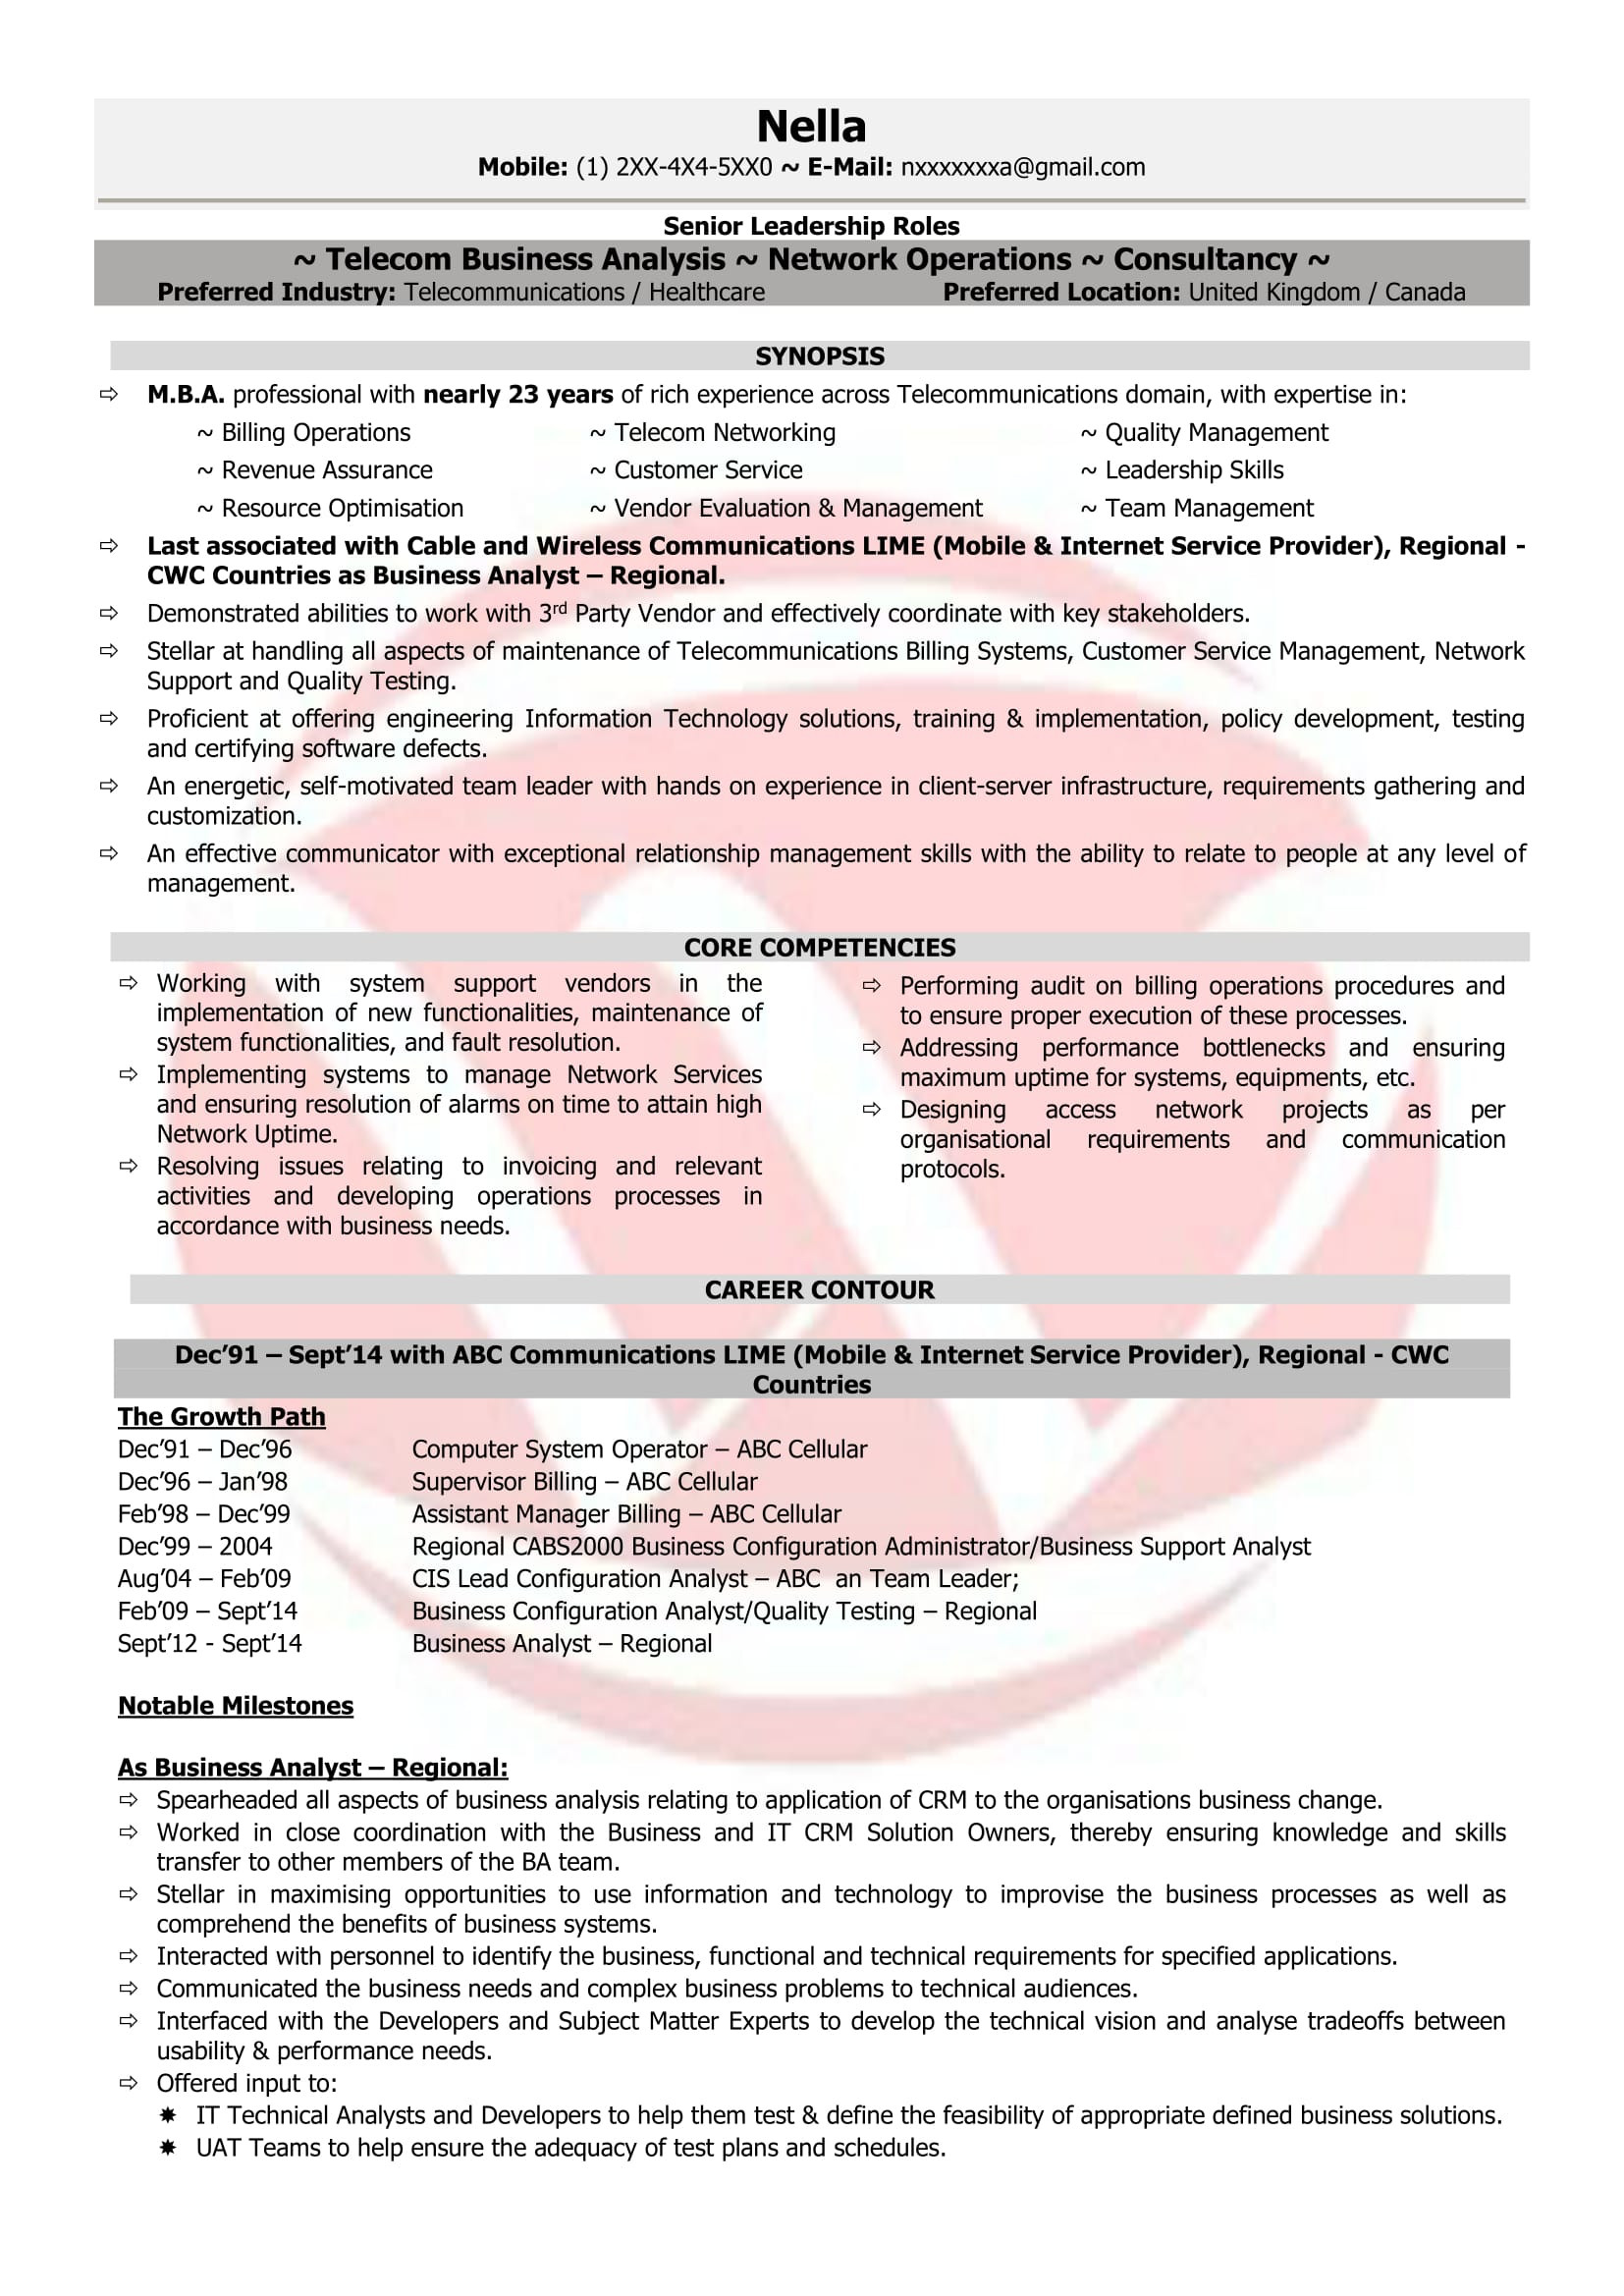 Telecom Project Manager Resume Sample India Telecom Manager Sample Resumes, Download Resume format Templates!